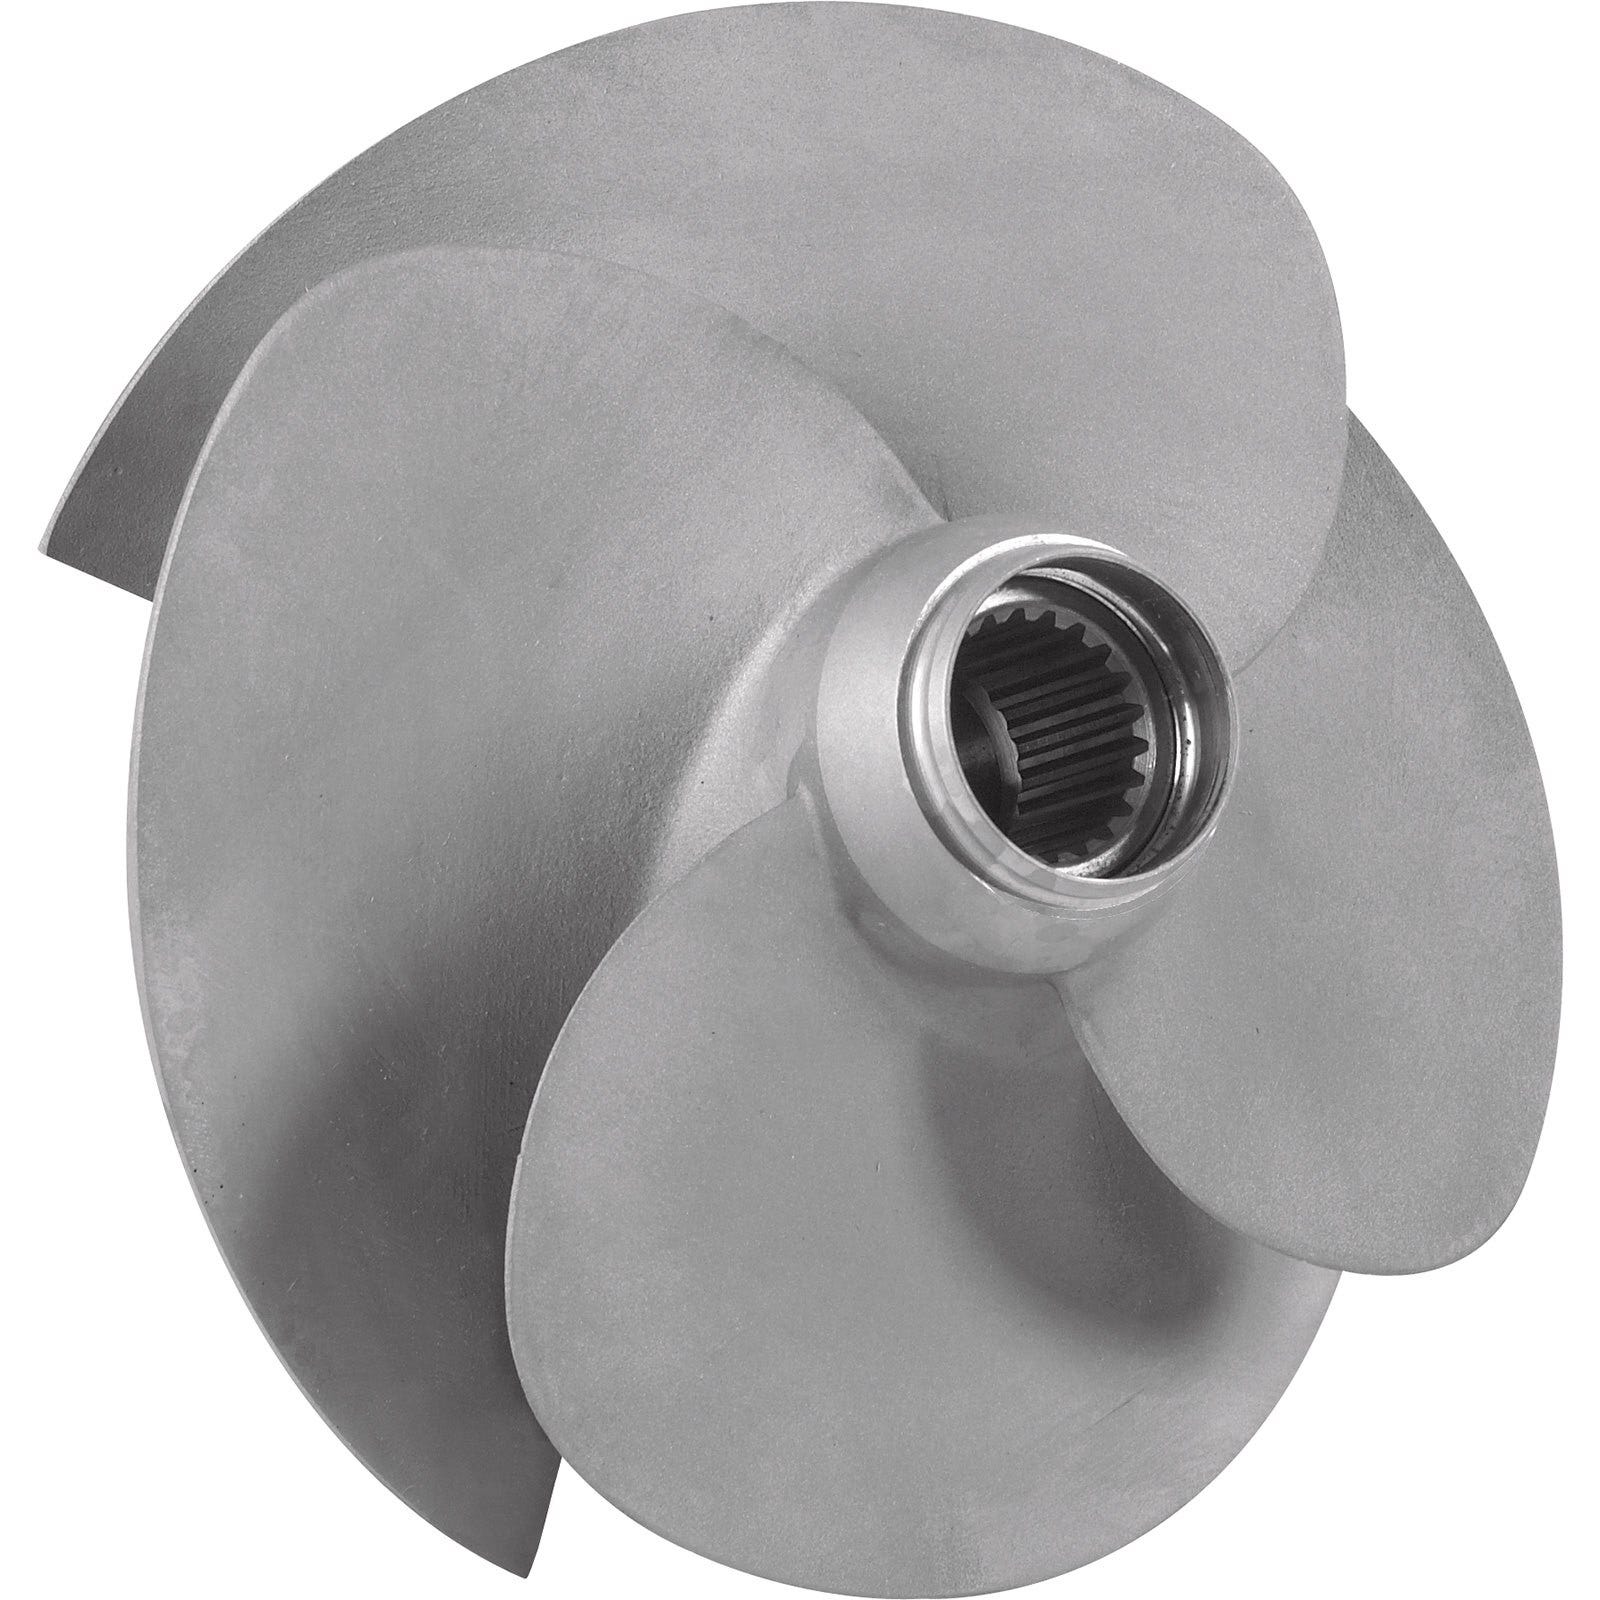 GTR 215 (2014-2016) Impeller - 267000801 - The Parts Lodge